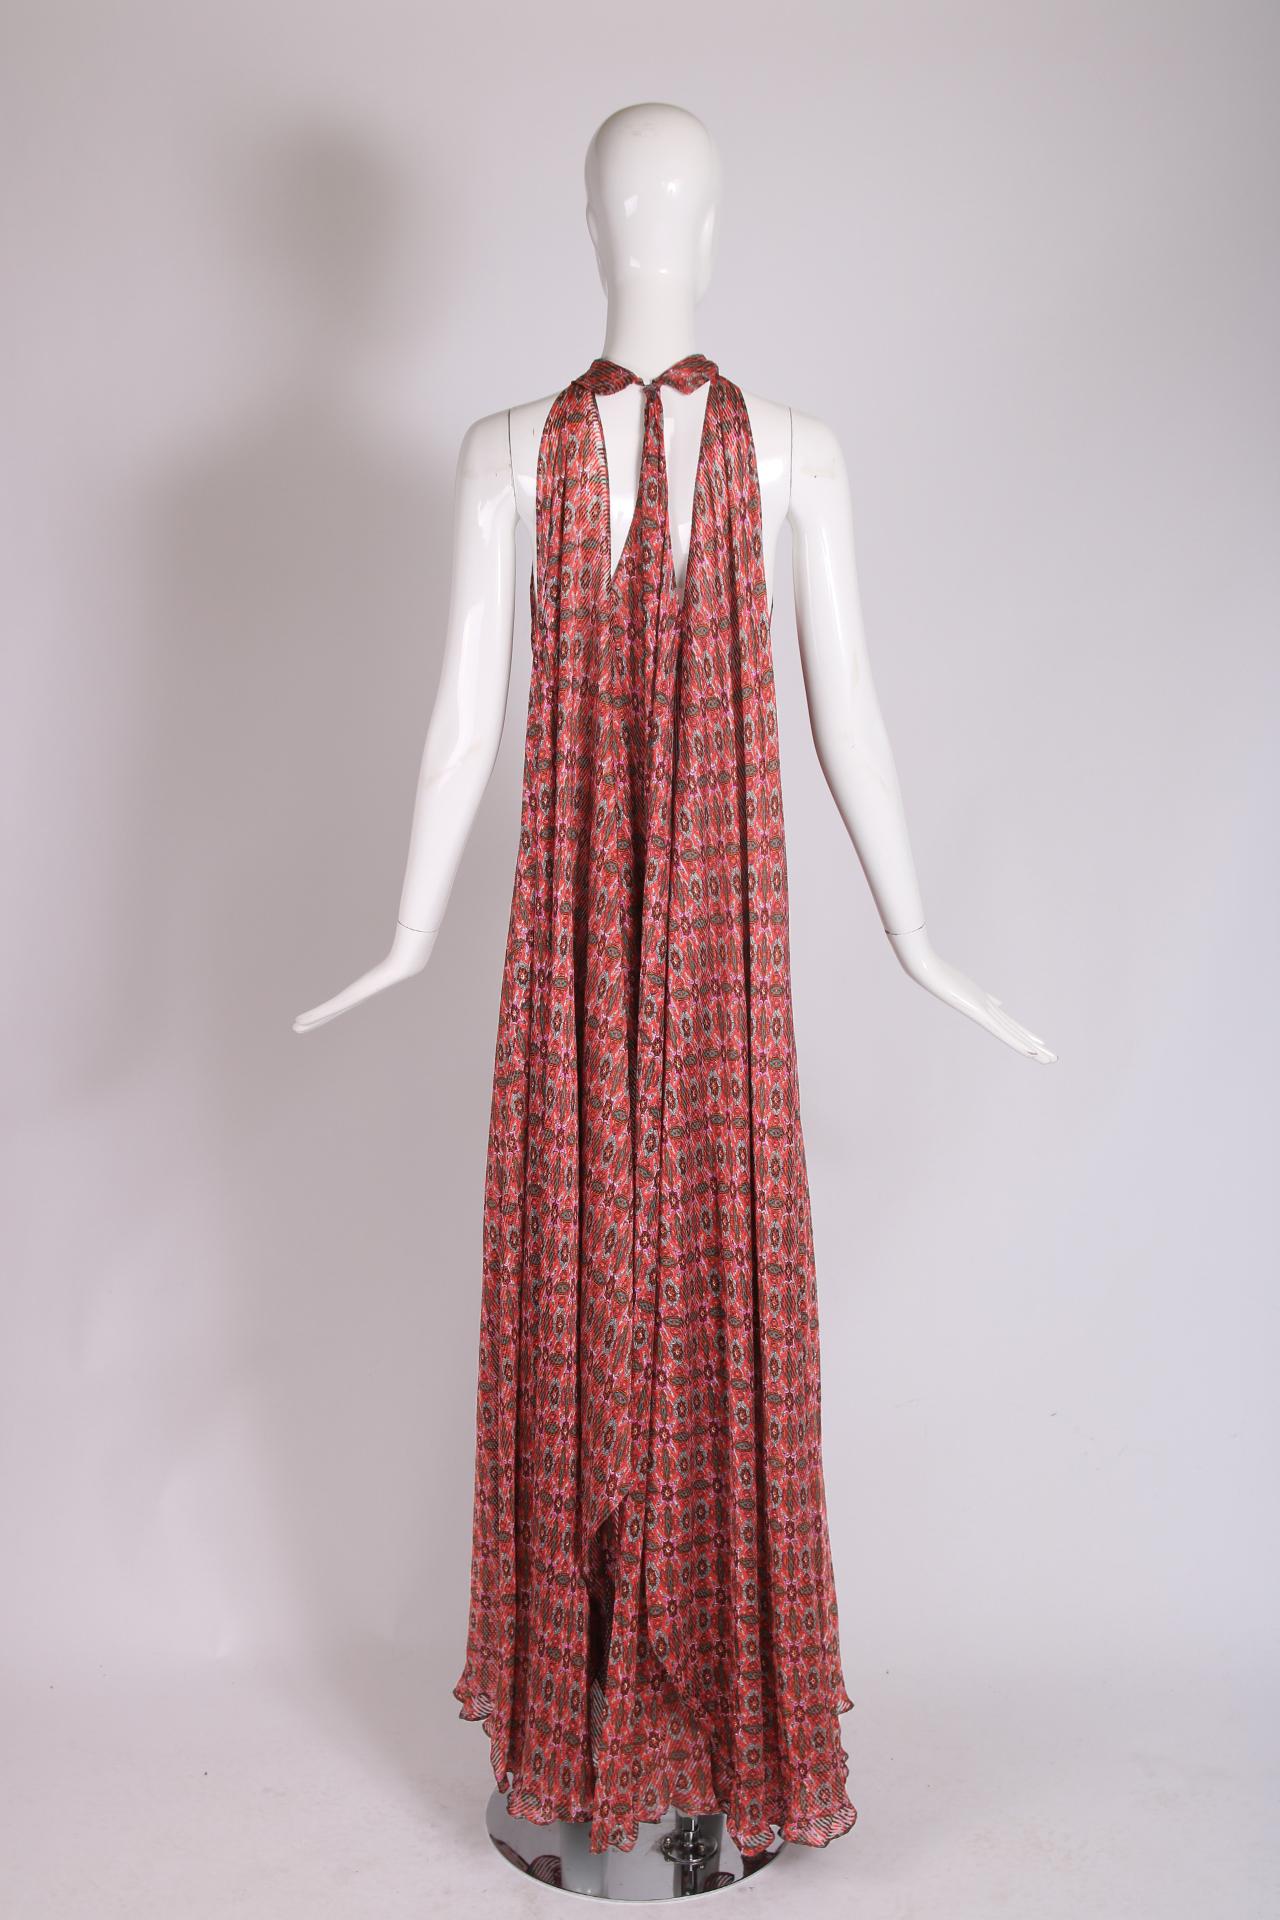 Madame Gres Pink Printed Chiffon Halter Neck Gown, 1970's 2